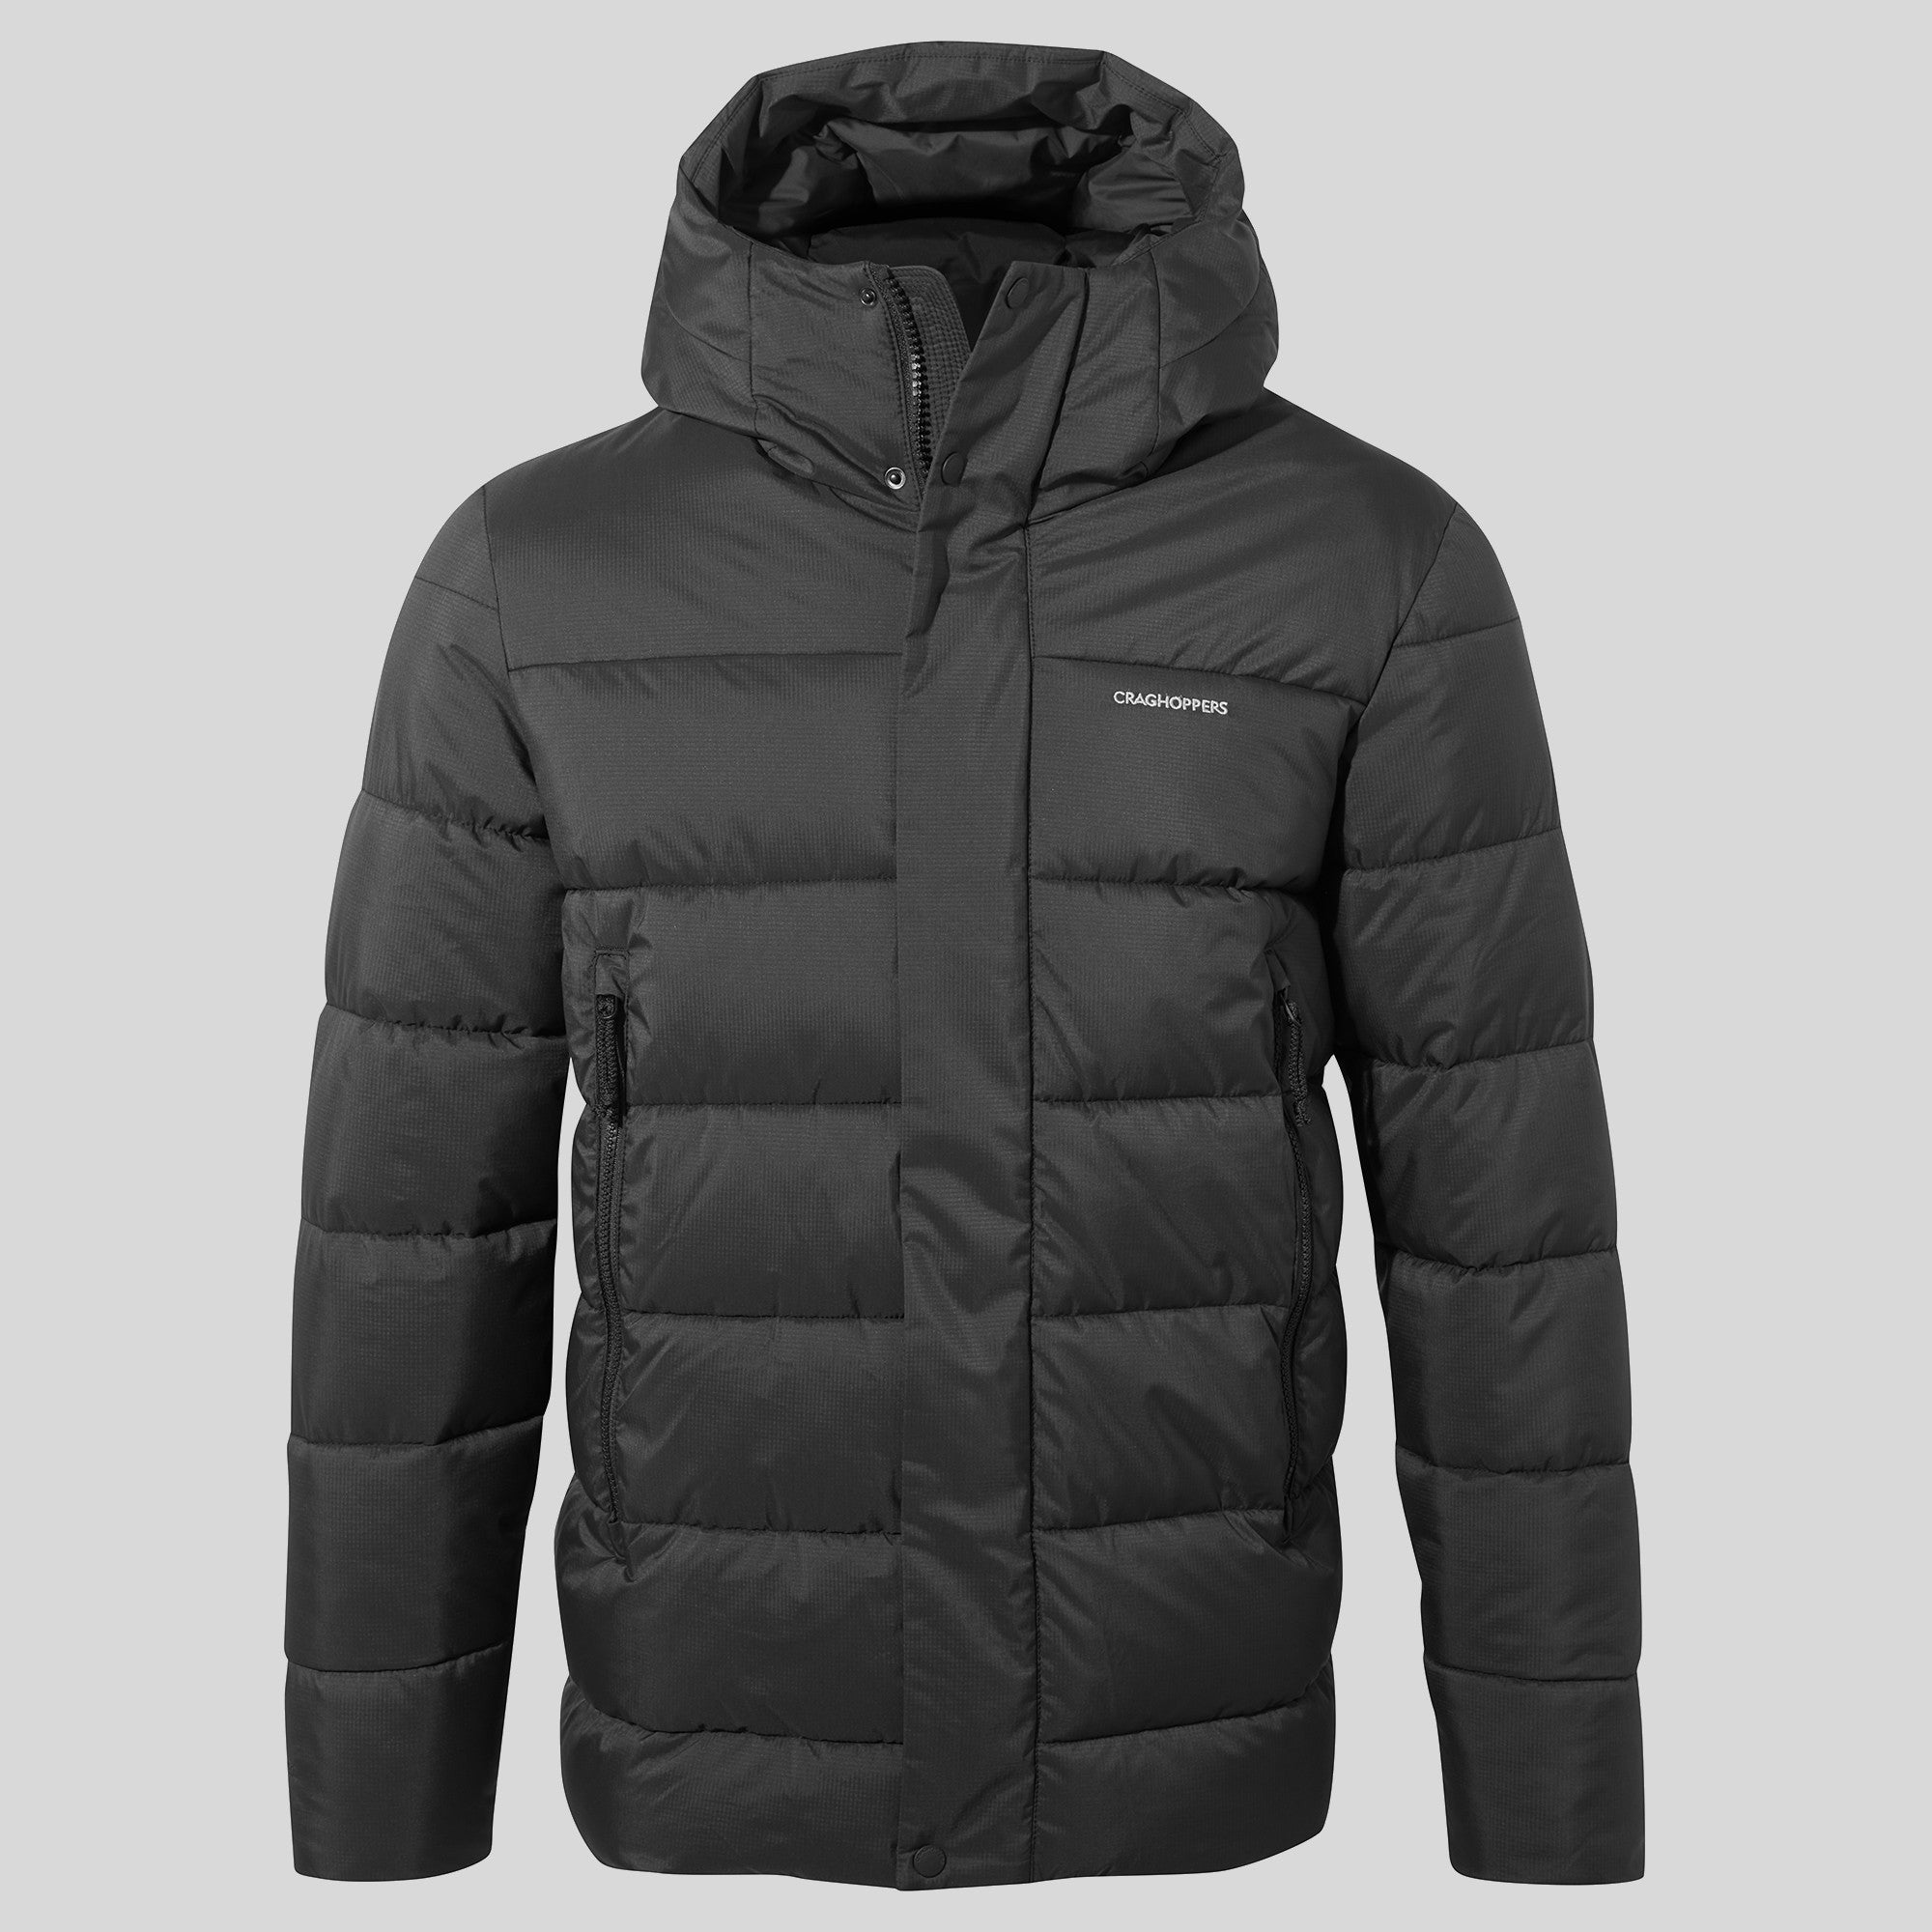 Craghoppers Womens Mull Jacket - Black Available Last Size 10